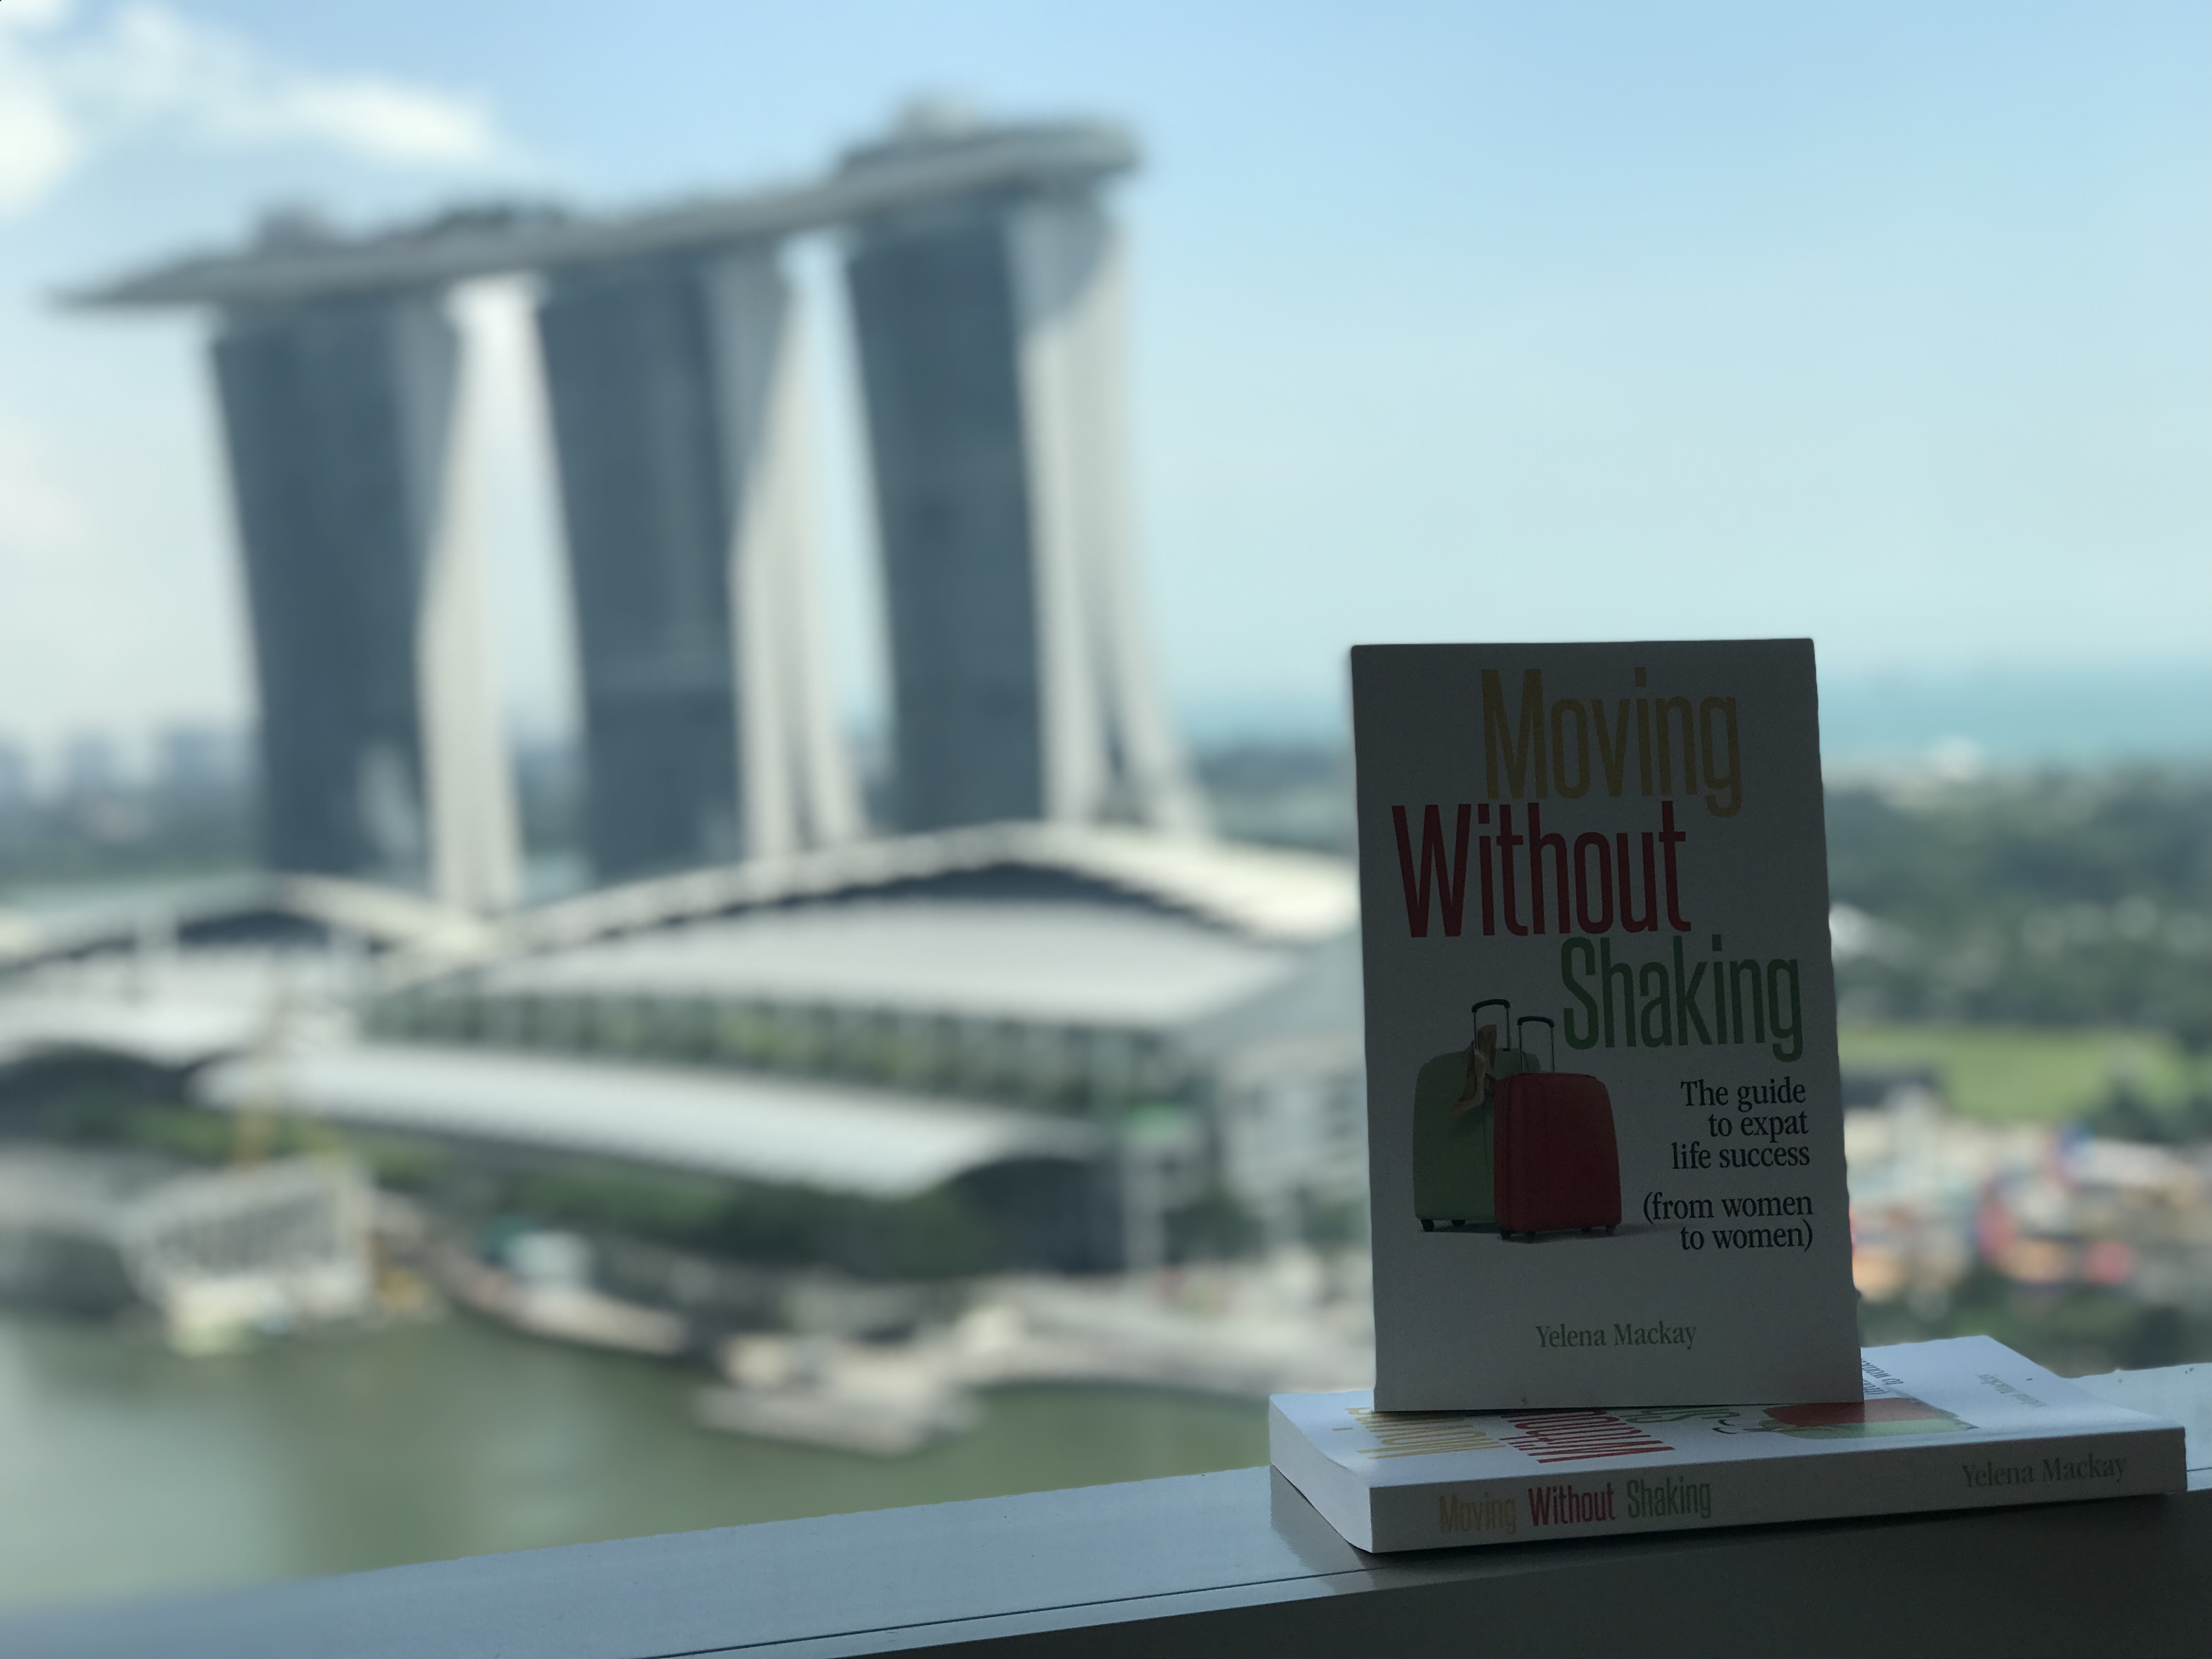 Moving-Without-Shaking-in-Singapore